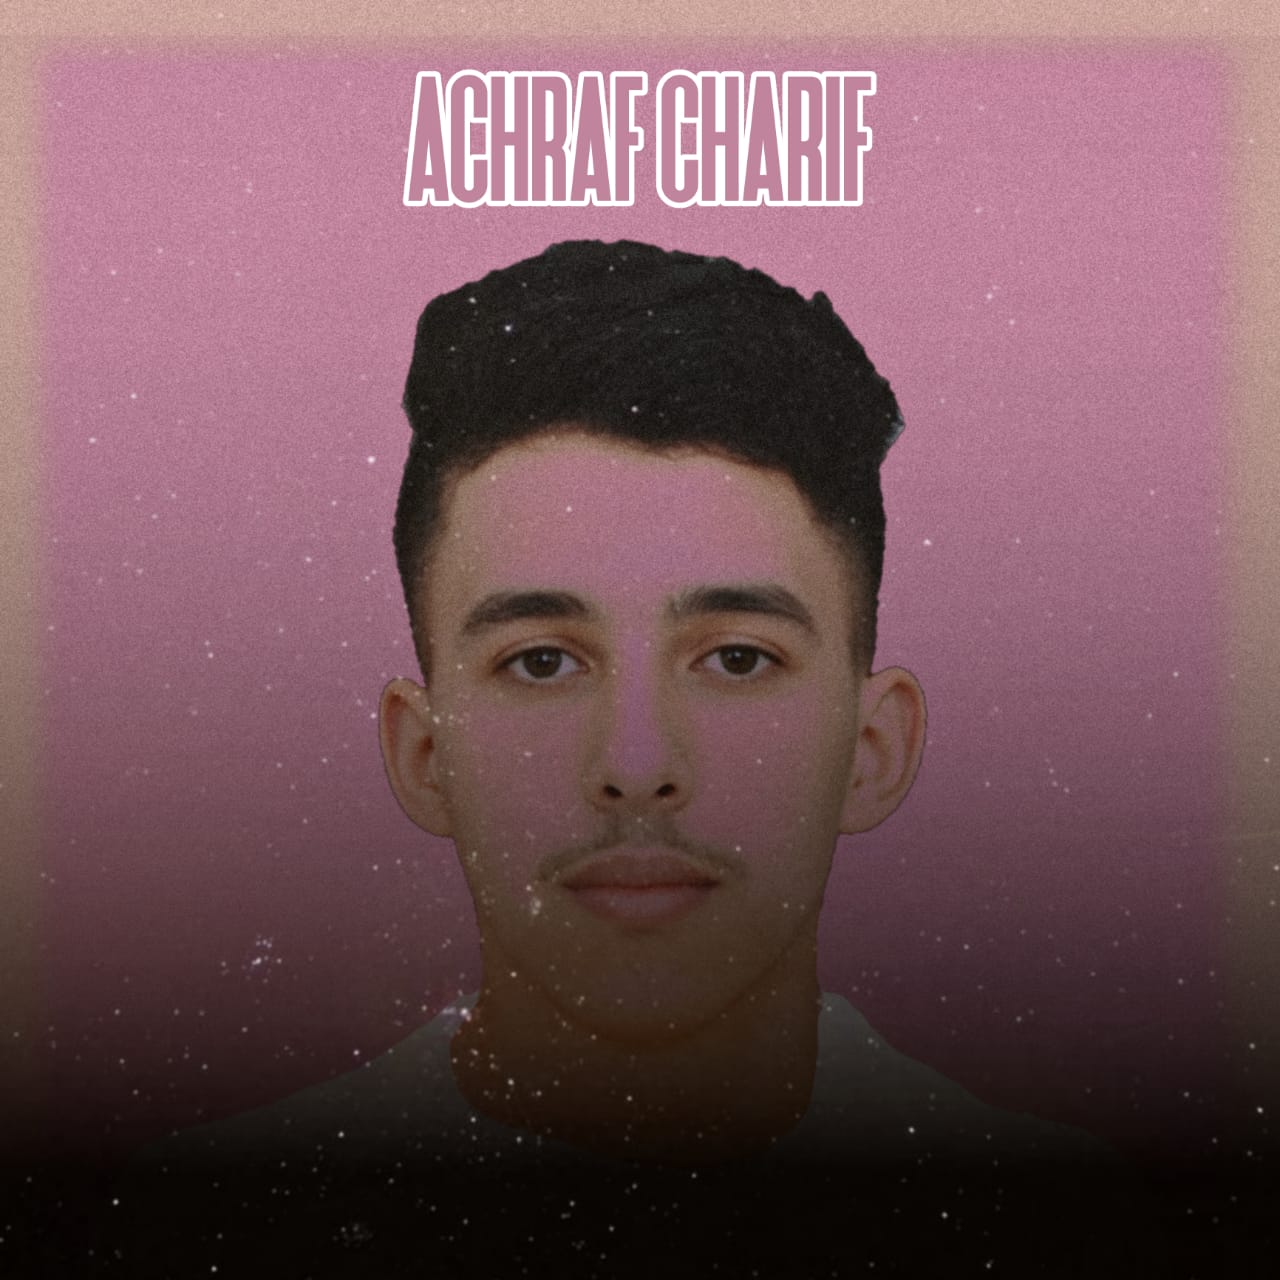 ACHRAF CHARIF: THE JOURNEY OF THE SUCCESSFUL MOROCCAN SINGER AND FOUNDER OF "ACHRAF MK STUDIO". 14